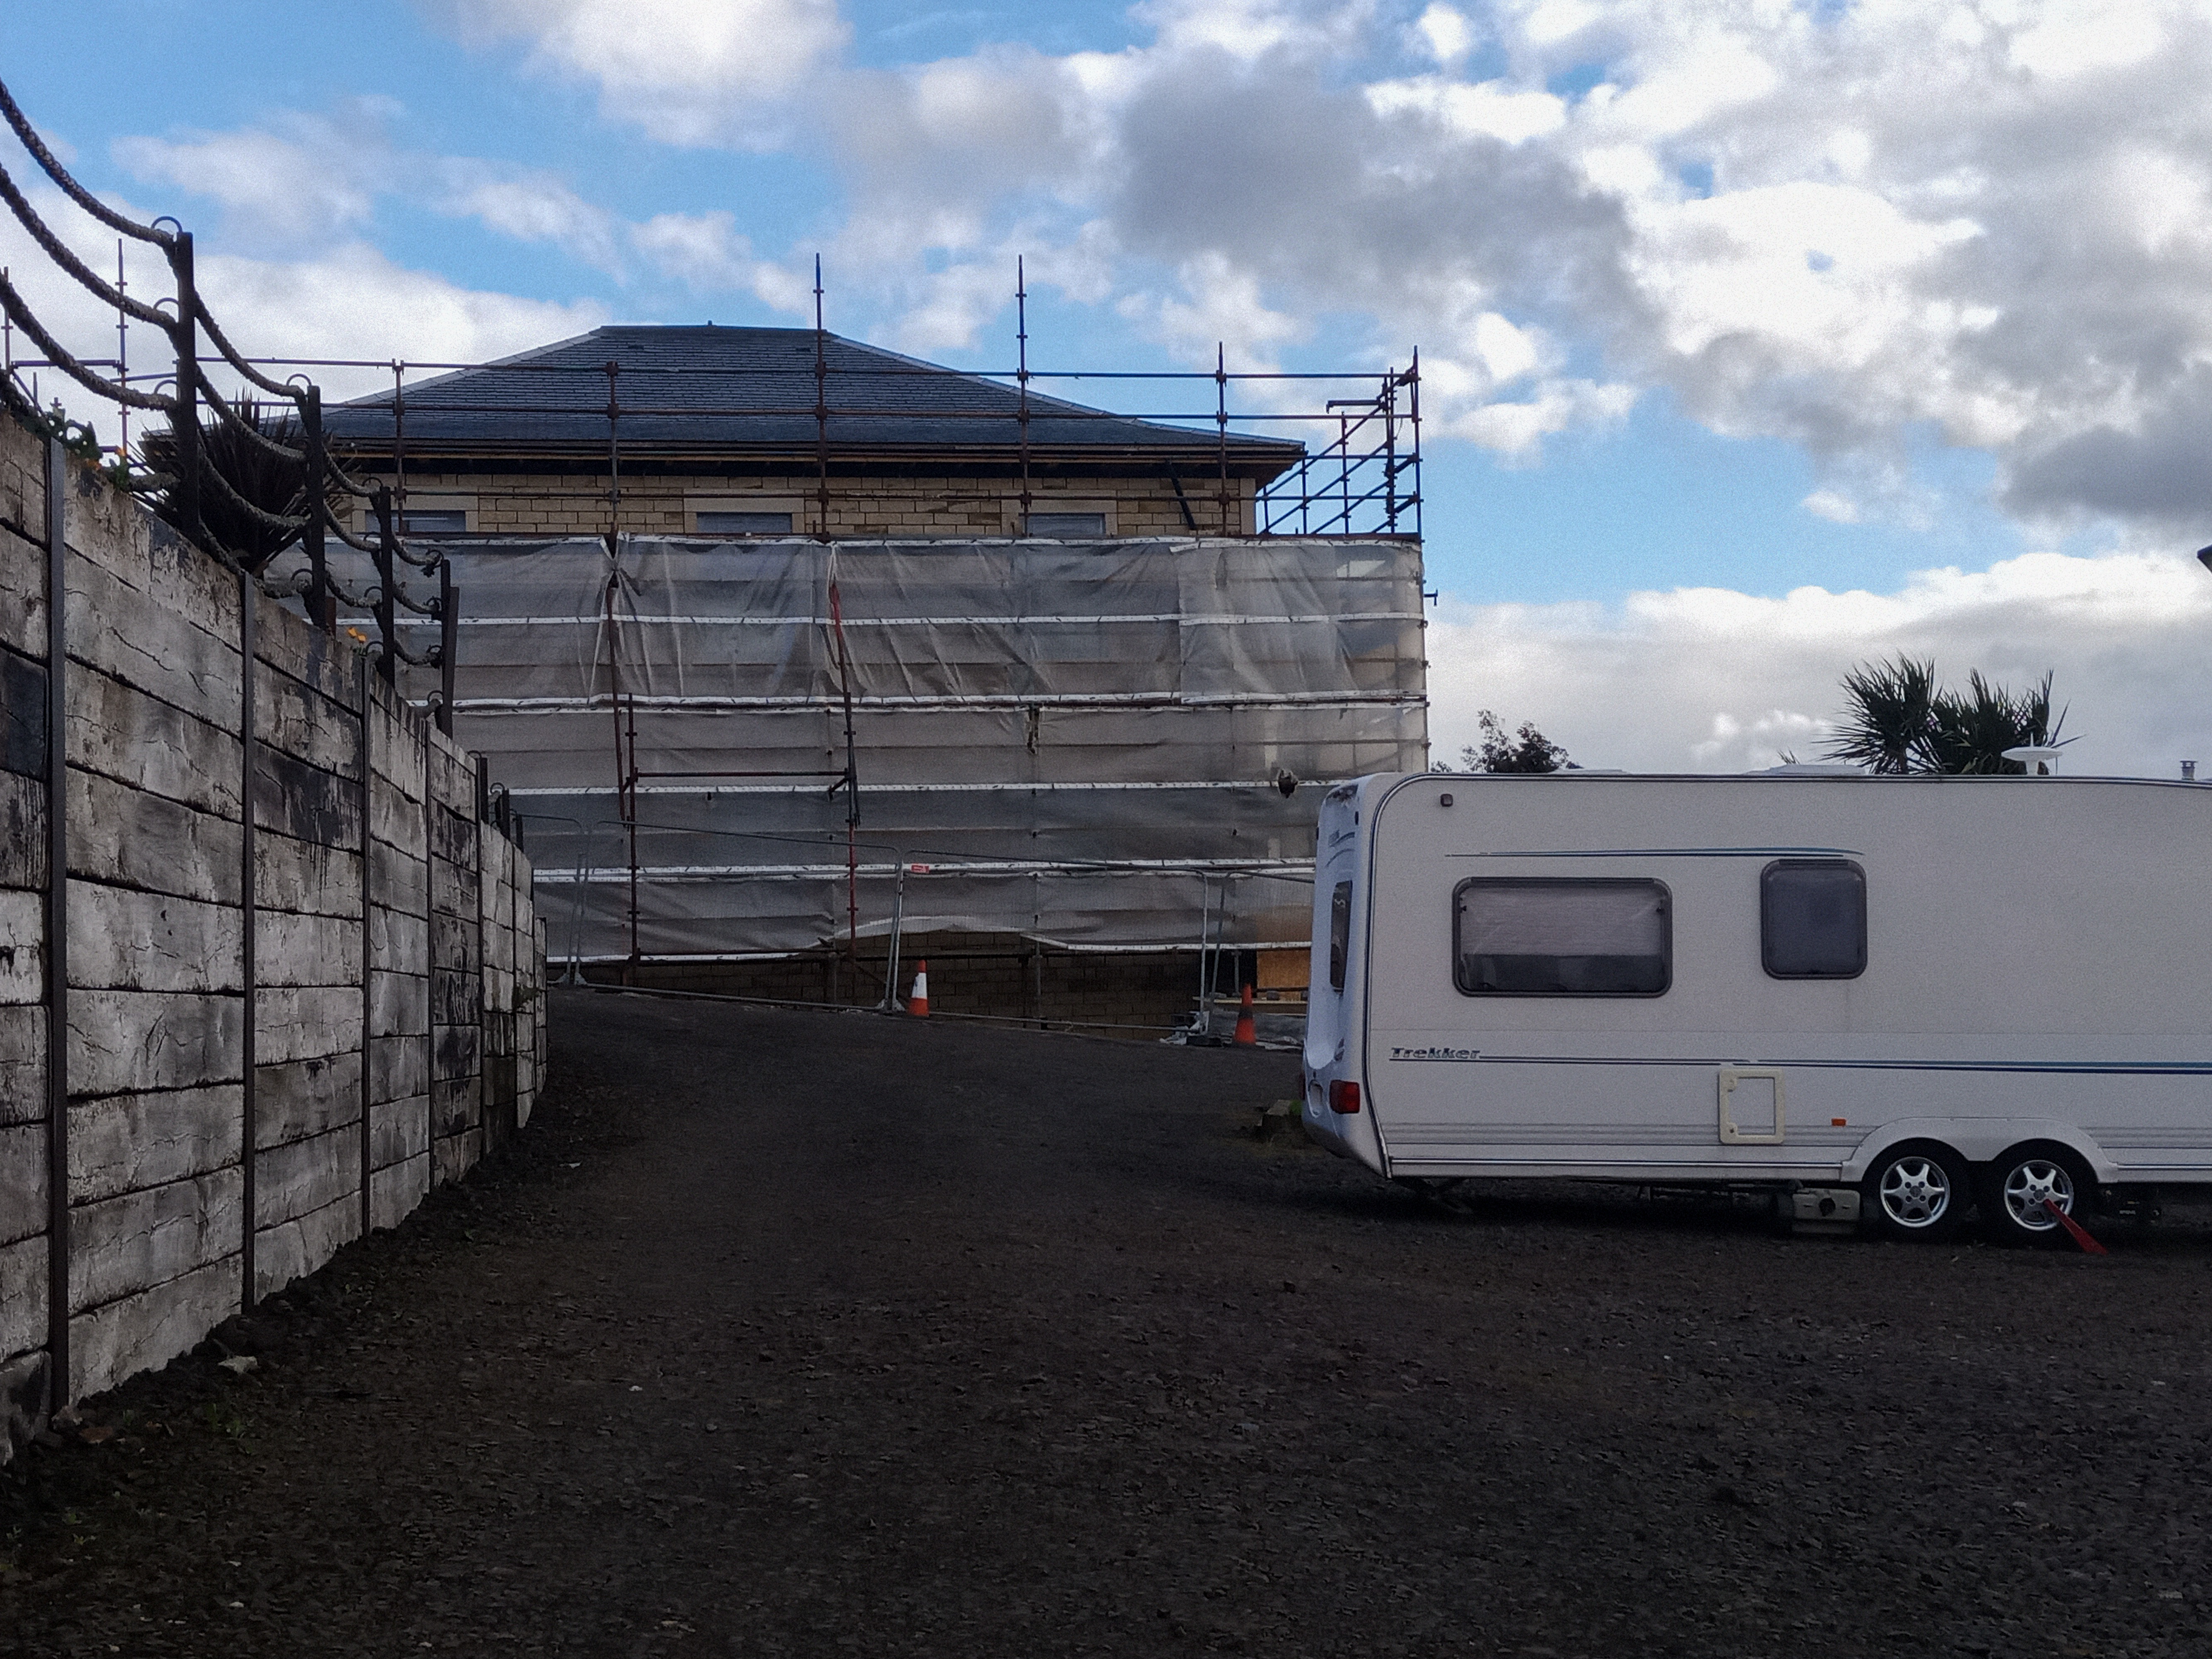 Caravan site with high wooden wall on one side and building with scaffolding ahead